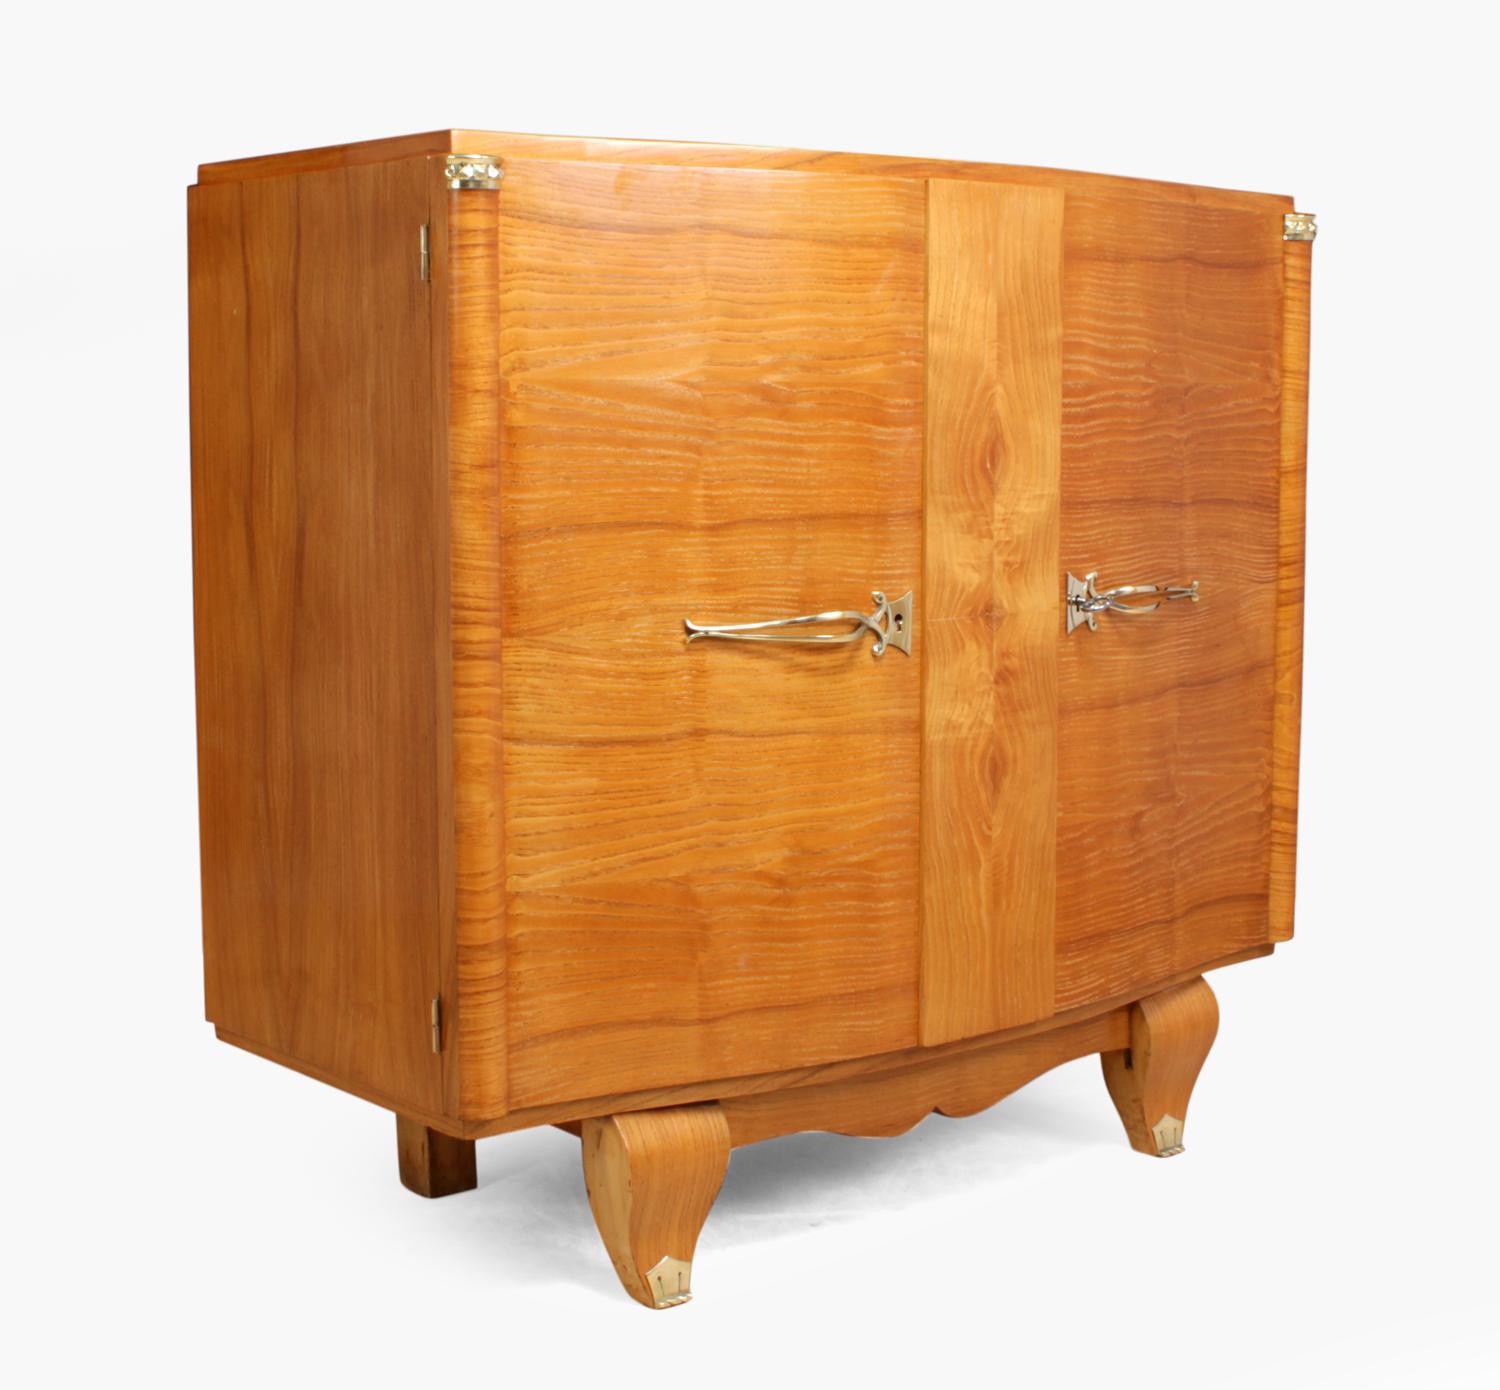 French Art Deco sideboard
A small French Art deco sideboard in bleached ash with solid brass fittings, this has two doors with shelf and two drawers behind

The sideboard has been restored and hand polished

Age: 1930

Style: Art